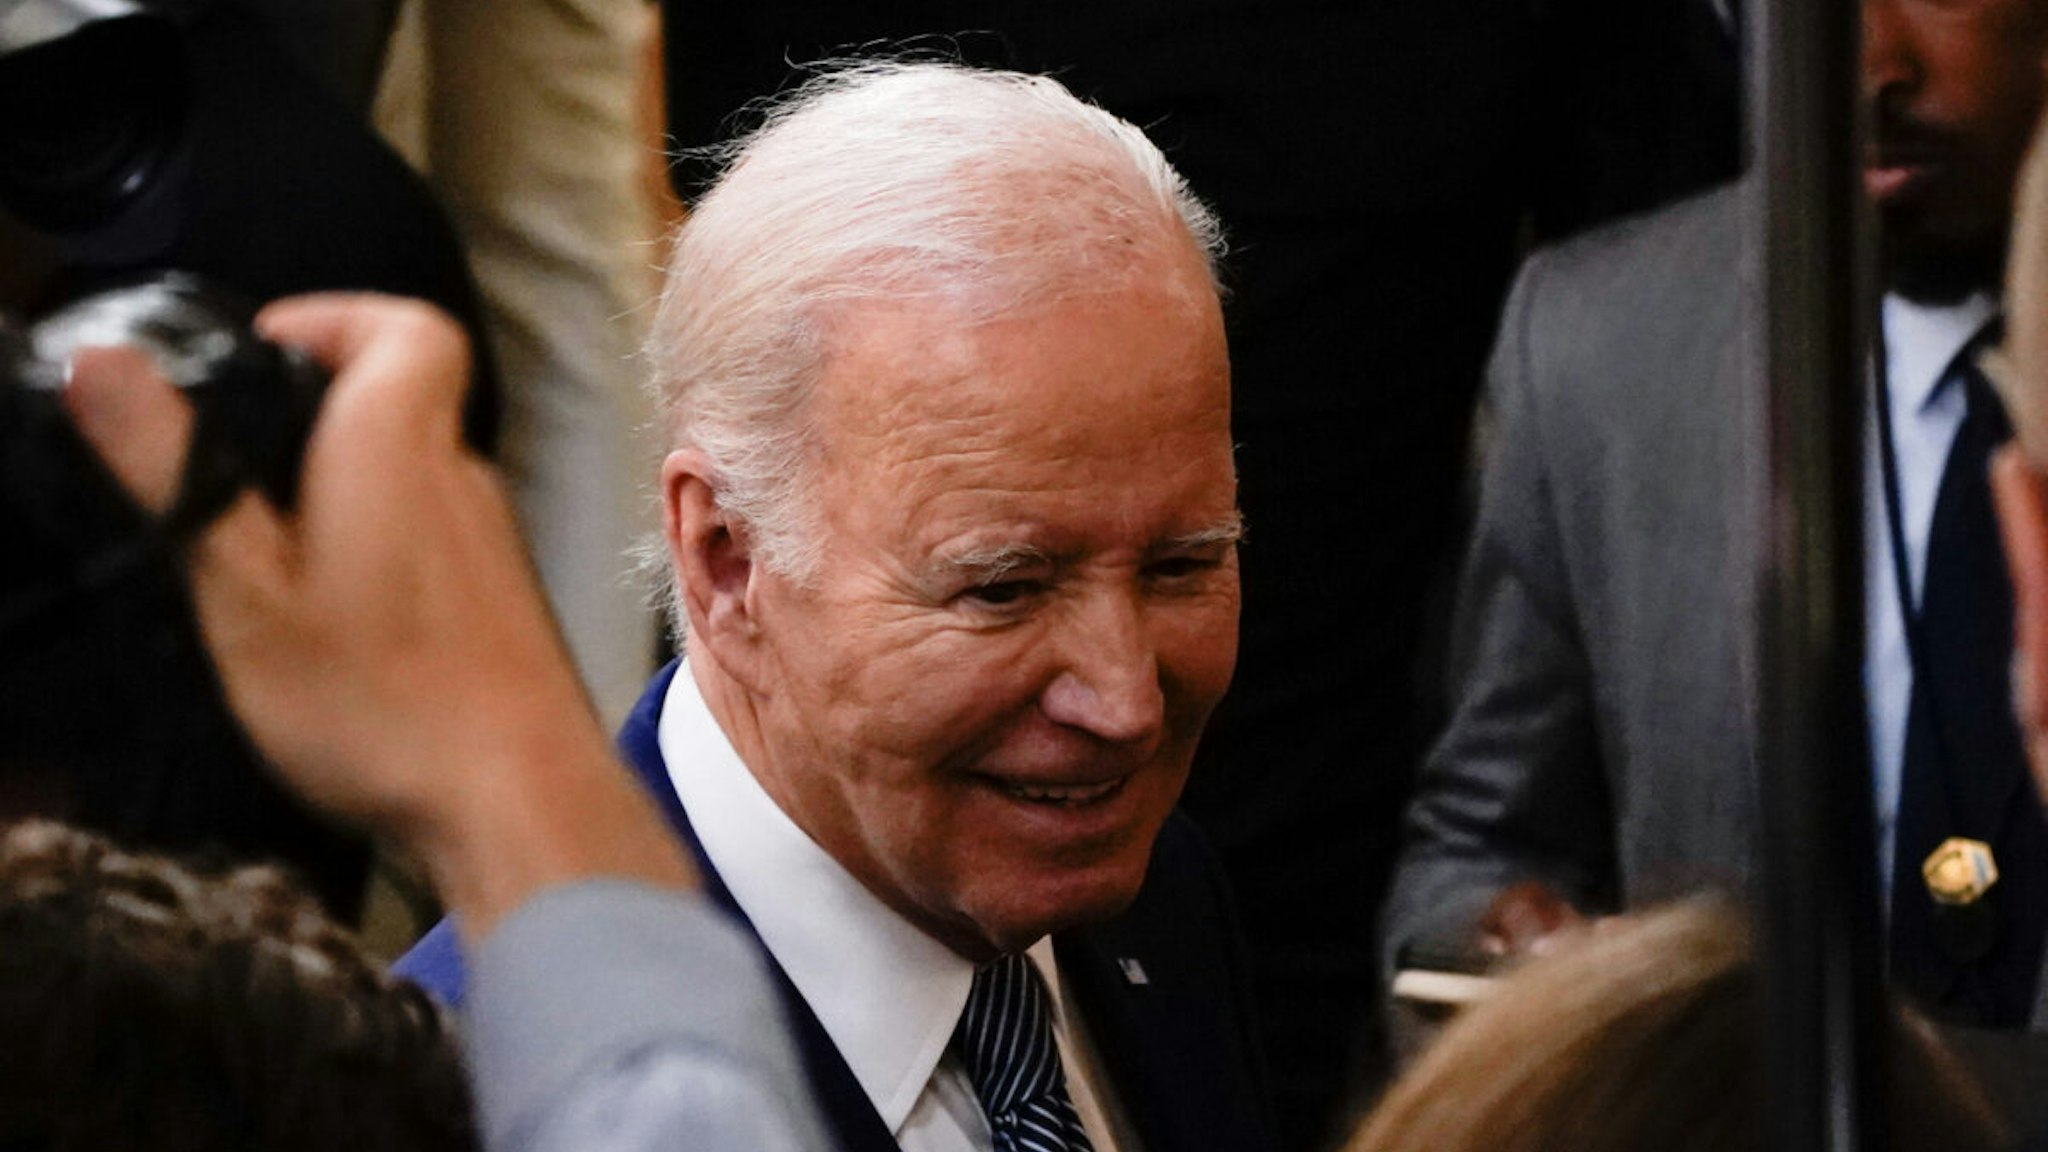 US President Joe Biden exits after speaking during an event in the East Room of the White House in Washington, DC, US, on Monday, June 26, 2023.